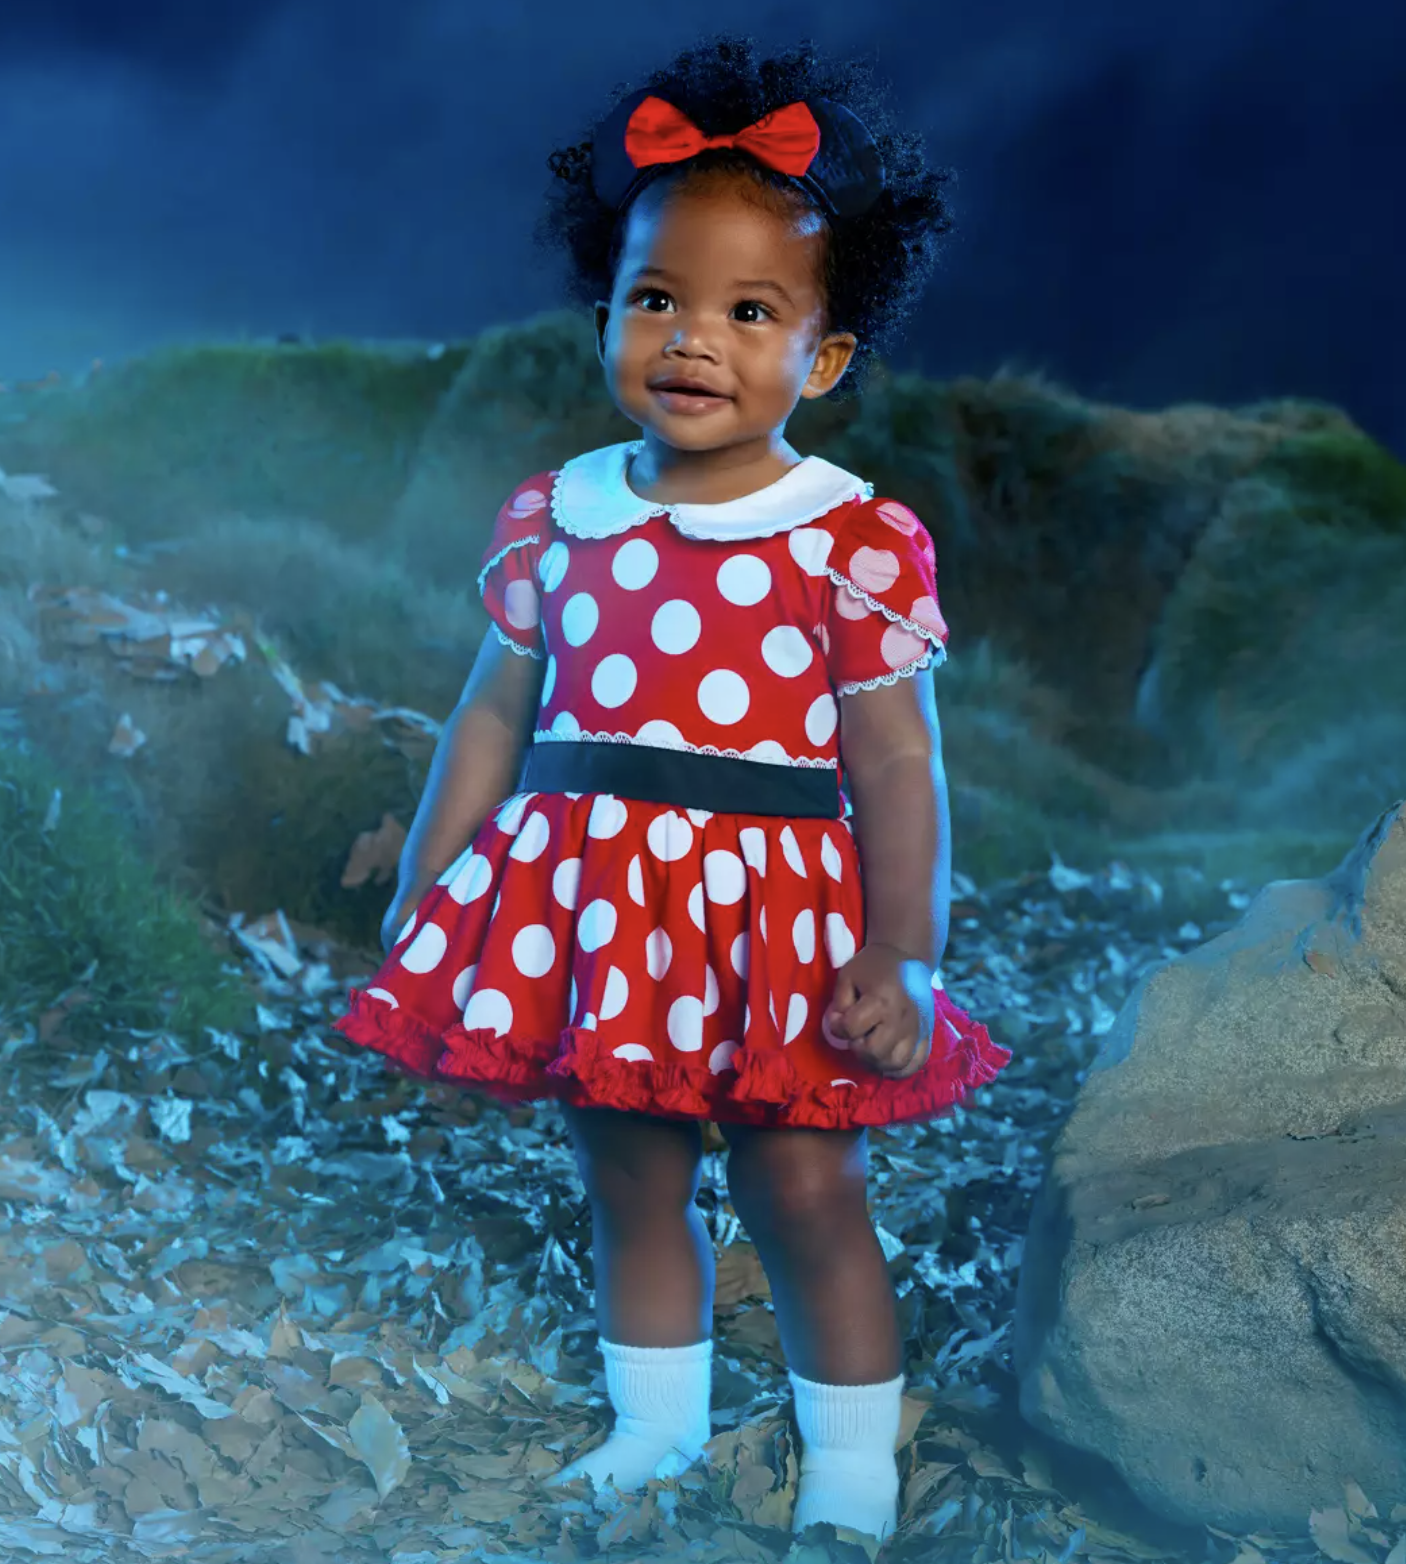 A child wearing a red Minnie Mouse costume with white polka dots and a red headband bow